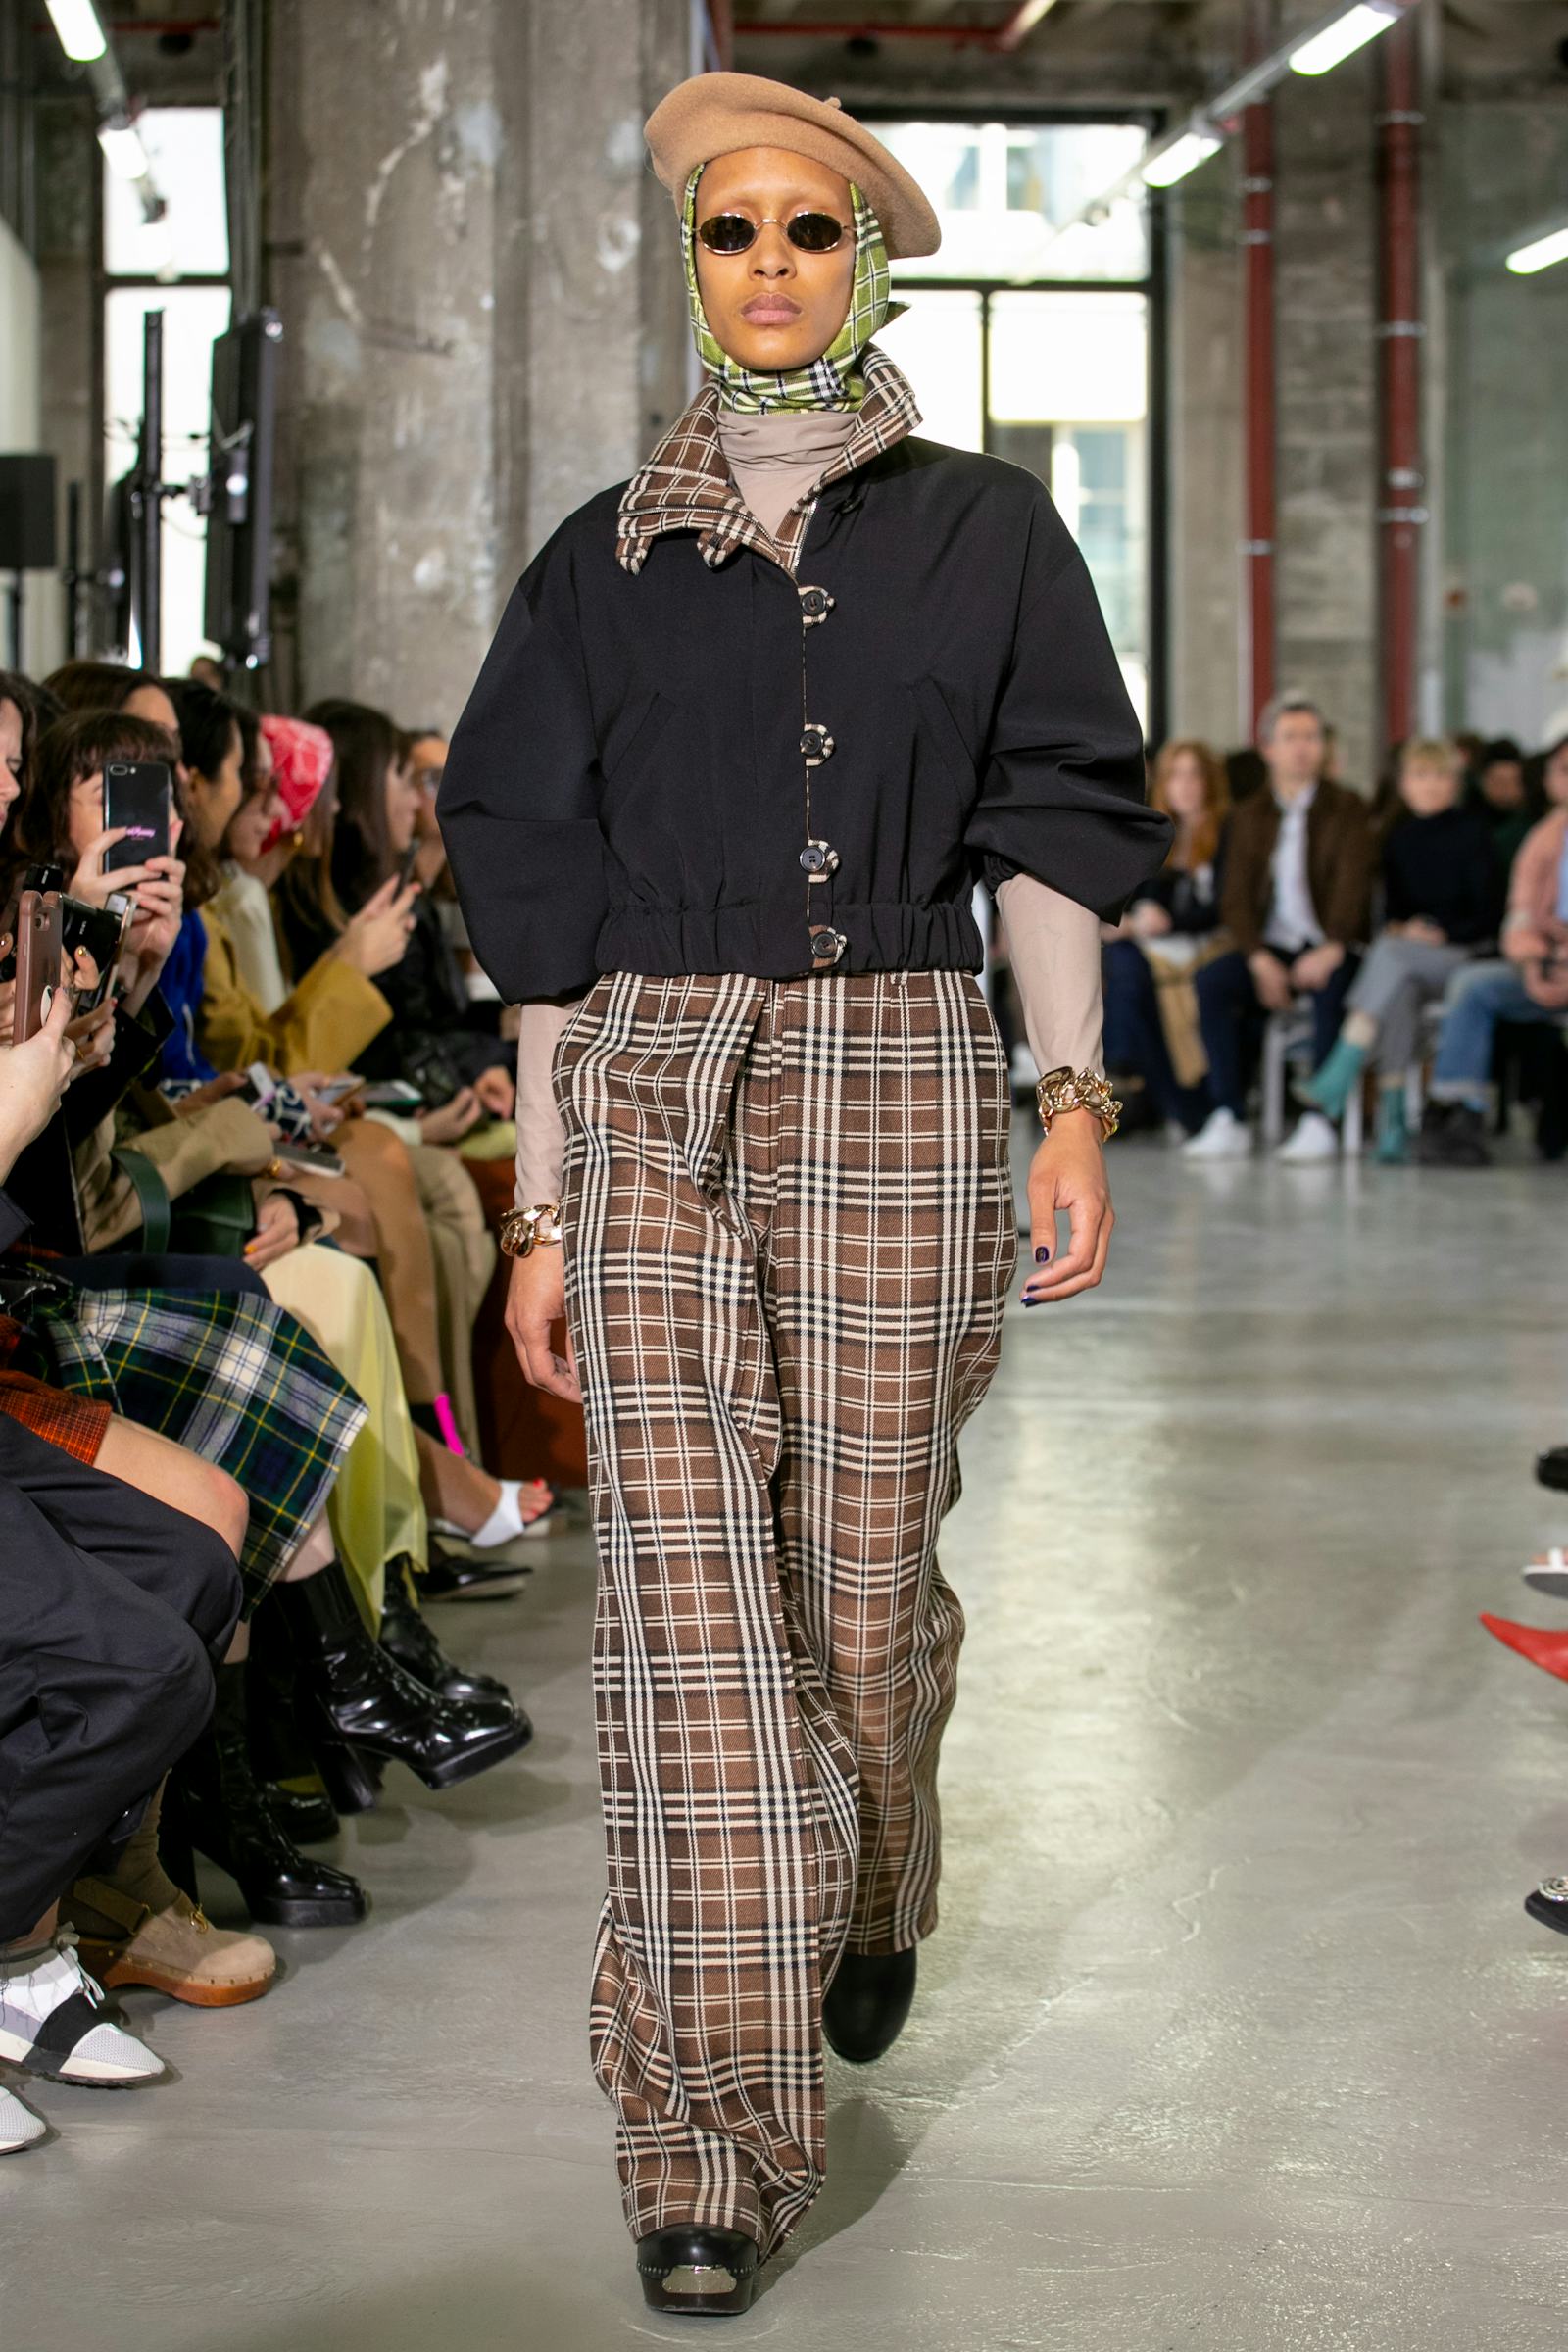 Modest Fashion In 2019: What Fall's Runways Suggest About The Future Of ...